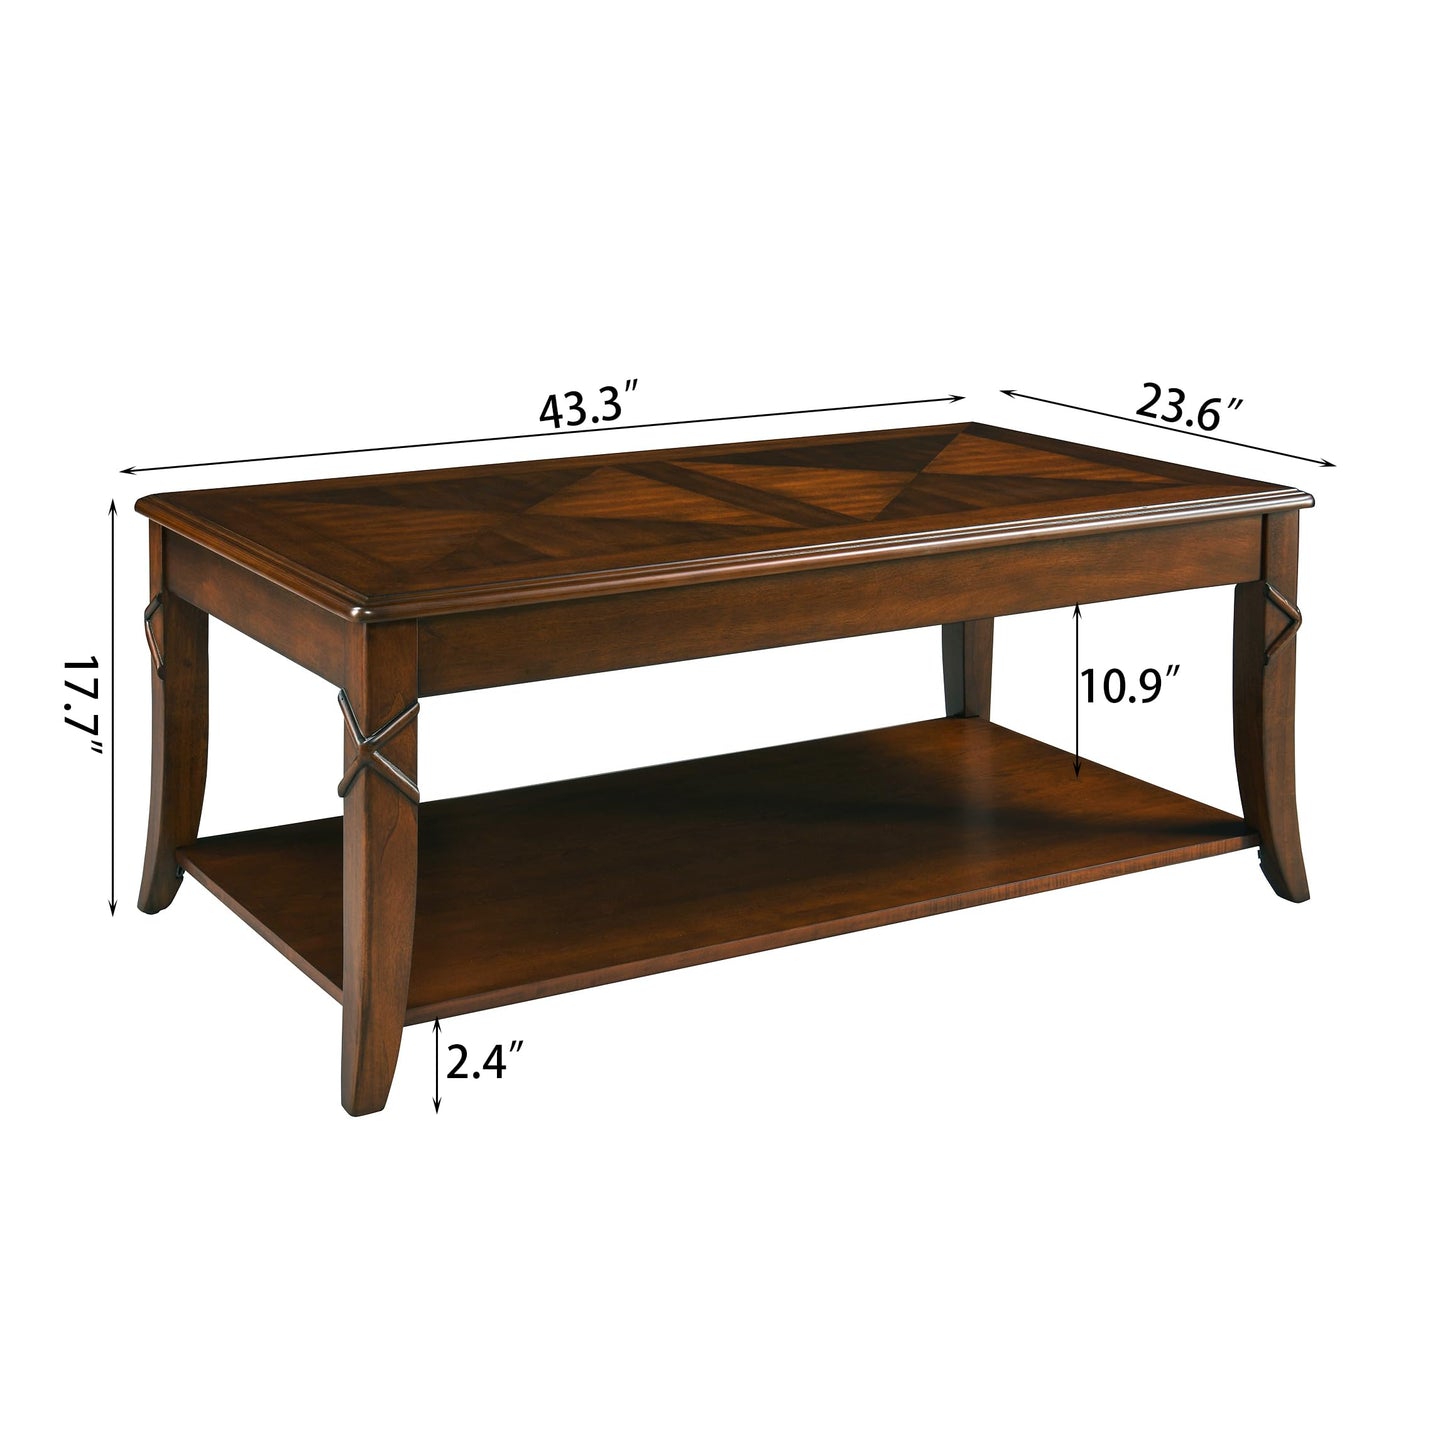 UMARTY Rectangle 43" Solid Wood Coffee Table, Handmade Crafts Living Room Furniture, Mid-Century Modern Coffee Table with Storage Shelf, Cherry